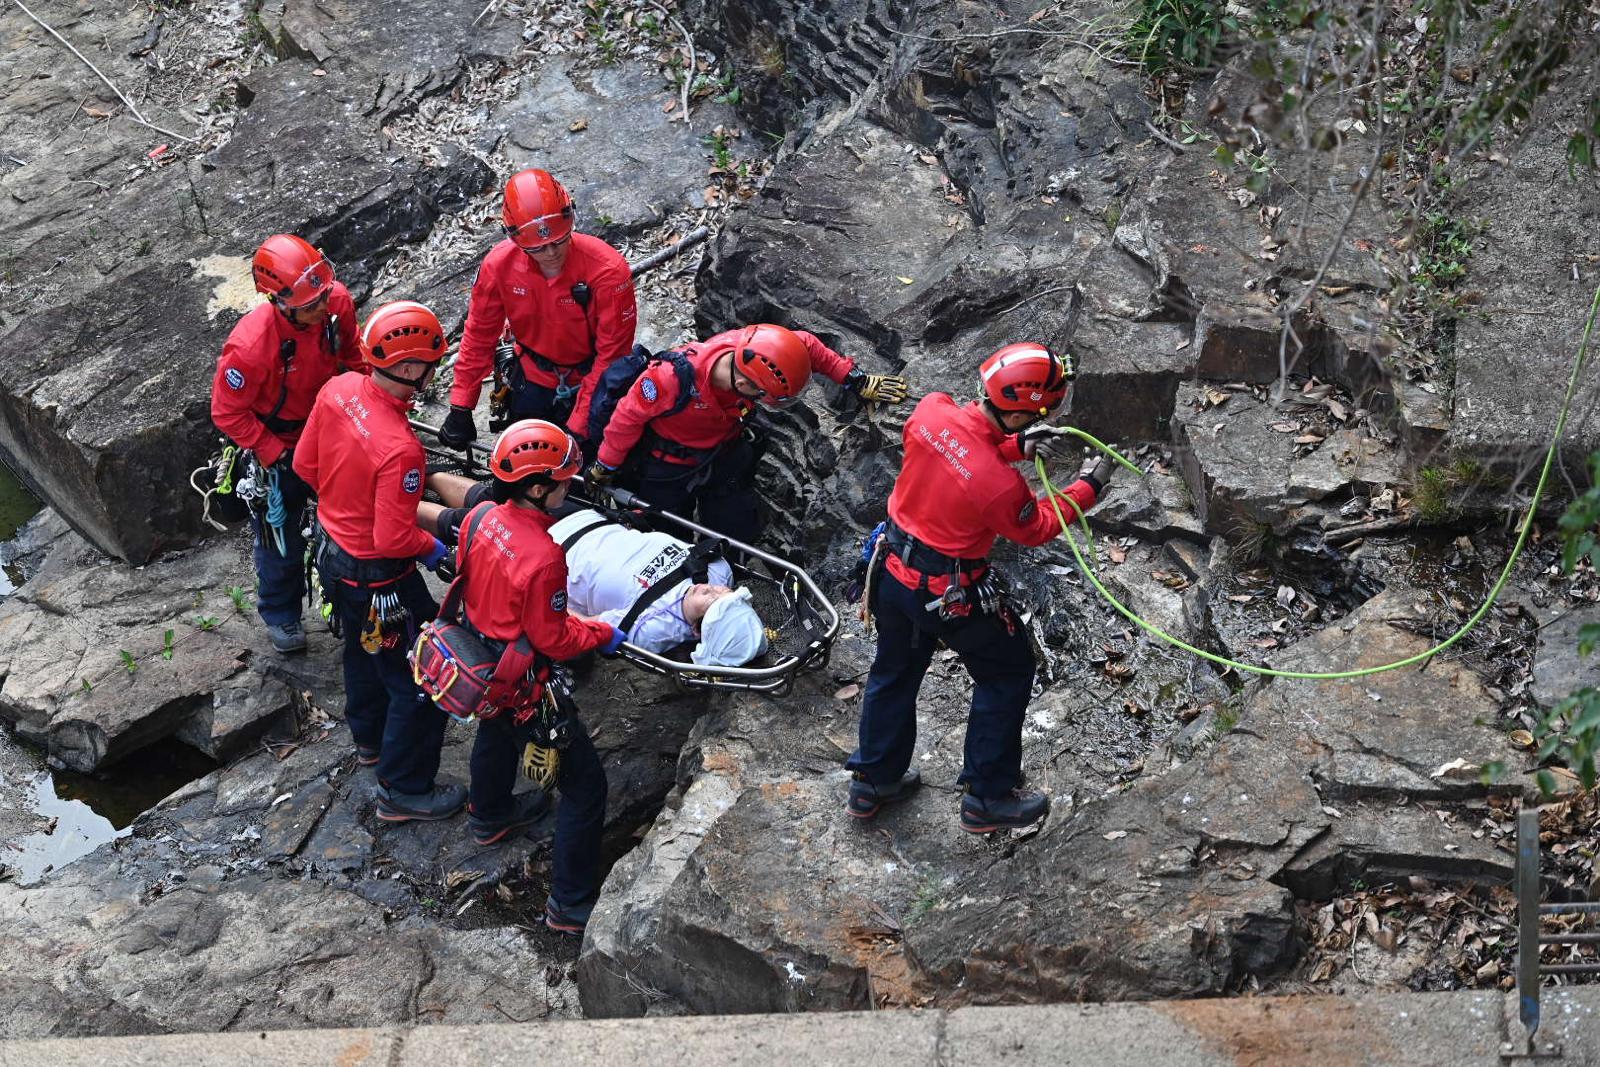 Police Hong Kong Island Regional Headquarters conducted an inter-departmental major incident exercise codenamed "COLDMIST" with the Fire Services Department, Government Flying Service, Civil Aid Service, Home Affairs Department, Agriculture, Fisheries and Conservation Department and Water Supplies Department at Aberdeen Country Park this afternoon (March 27). Picture shows Civil Aid Service officers rescuing the injured.